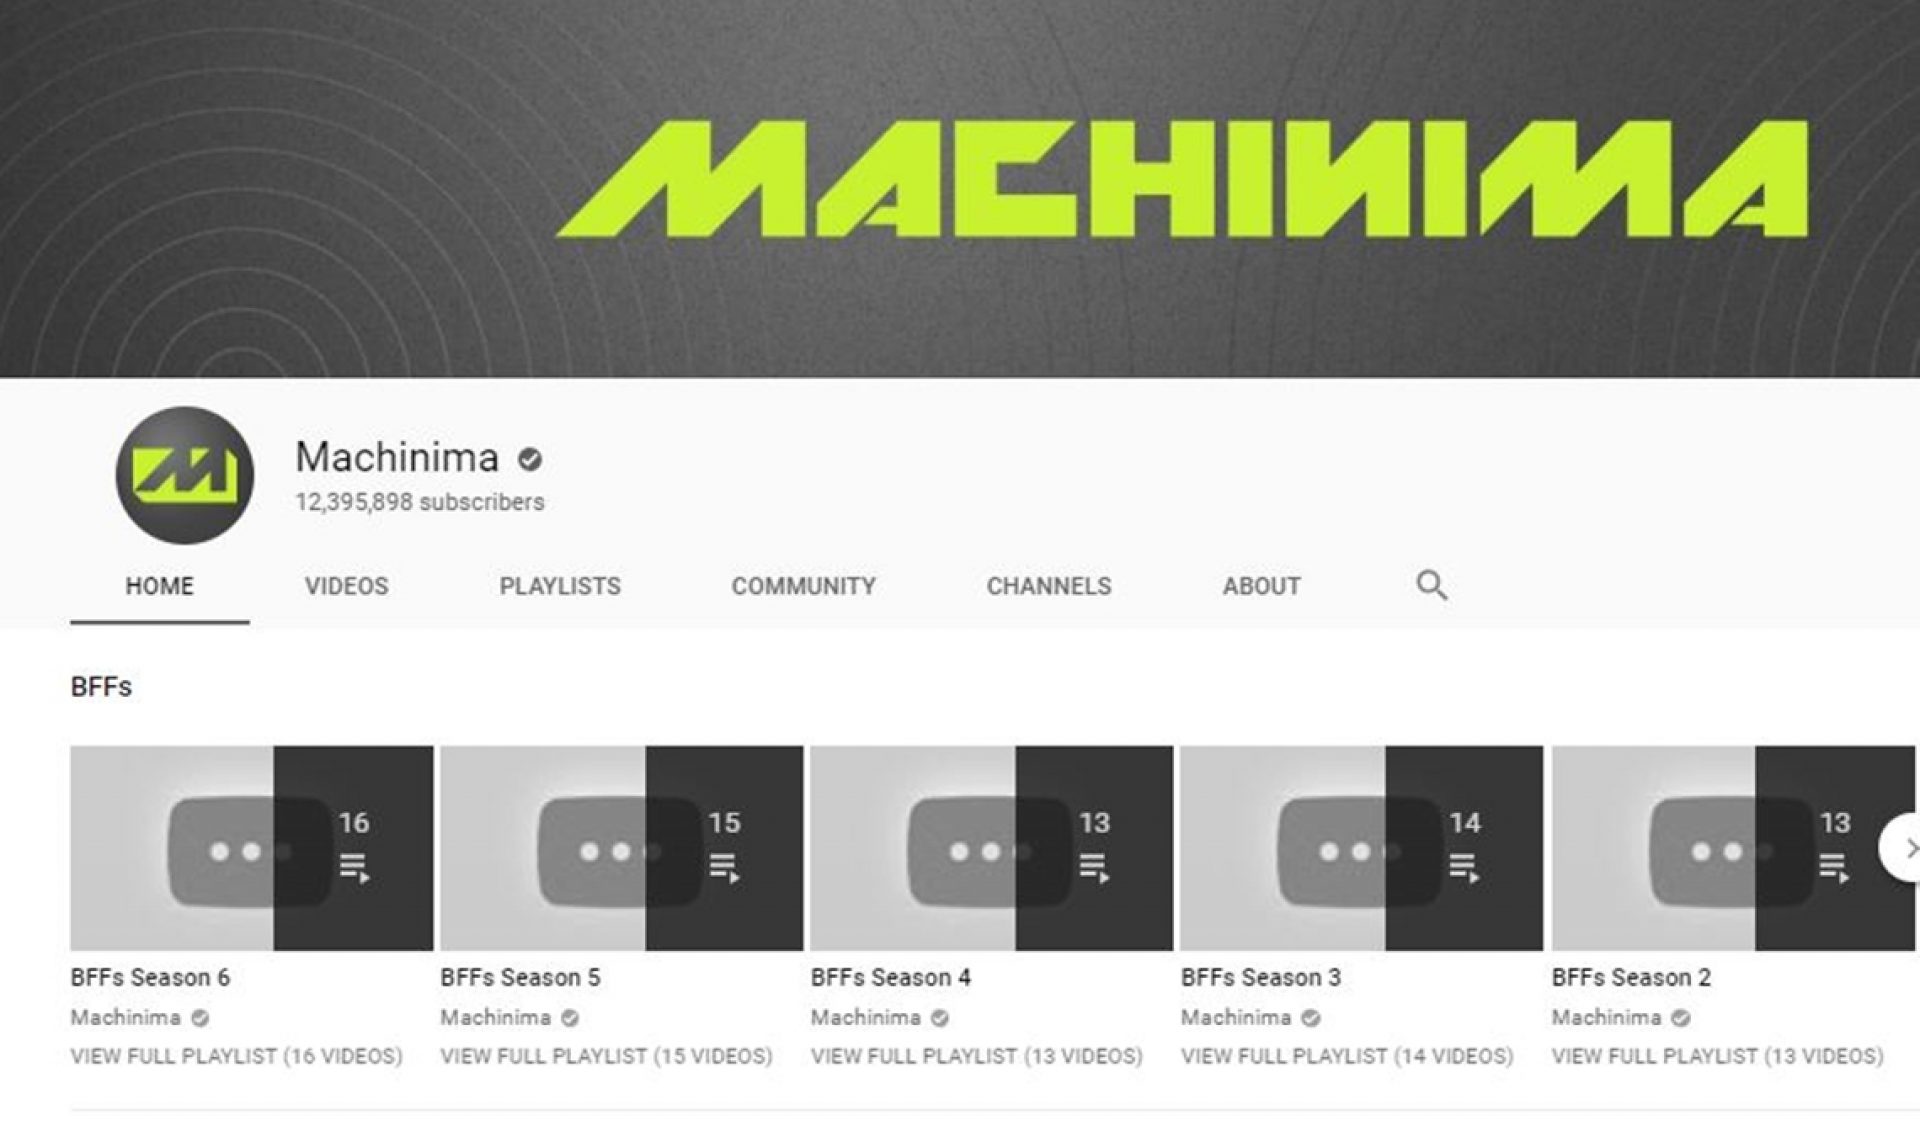 After Porting Its Creator Network To Fullscreen, Machinima Wipes Seminal YouTube Channel